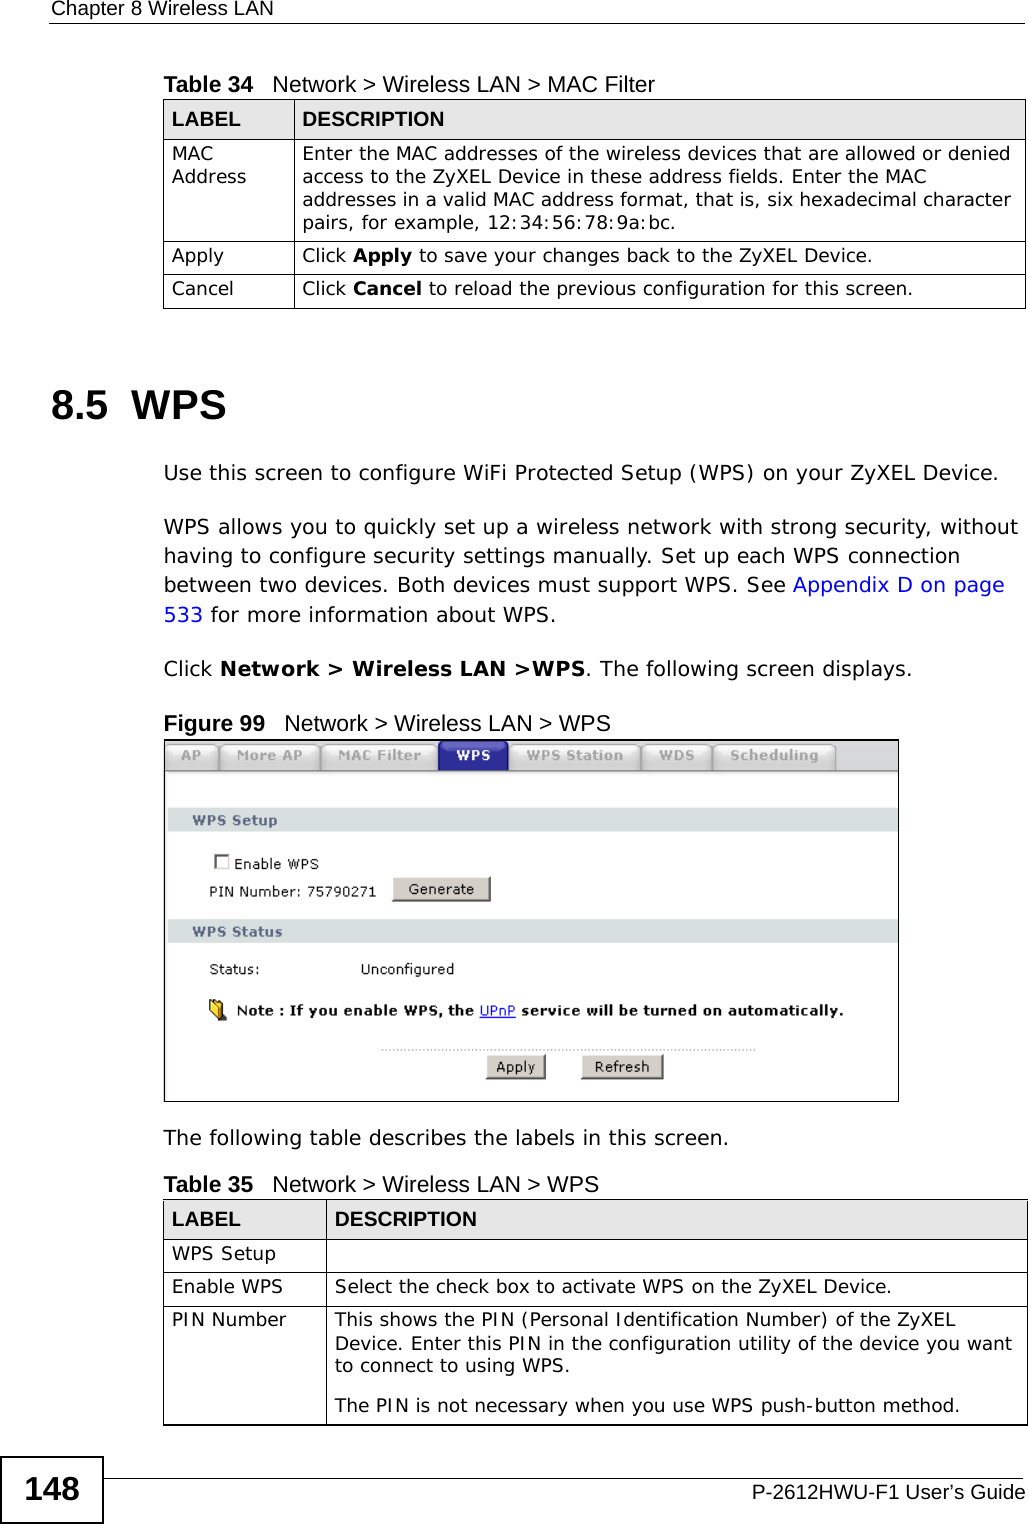 Chapter 8 Wireless LANP-2612HWU-F1 User’s Guide1488.5  WPSUse this screen to configure WiFi Protected Setup (WPS) on your ZyXEL Device.WPS allows you to quickly set up a wireless network with strong security, without having to configure security settings manually. Set up each WPS connection between two devices. Both devices must support WPS. See Appendix D on page 533 for more information about WPS.Click Network &gt; Wireless LAN &gt;WPS. The following screen displays.Figure 99   Network &gt; Wireless LAN &gt; WPSThe following table describes the labels in this screen.MAC Address Enter the MAC addresses of the wireless devices that are allowed or denied access to the ZyXEL Device in these address fields. Enter the MAC addresses in a valid MAC address format, that is, six hexadecimal character pairs, for example, 12:34:56:78:9a:bc.Apply Click Apply to save your changes back to the ZyXEL Device.Cancel Click Cancel to reload the previous configuration for this screen.Table 34   Network &gt; Wireless LAN &gt; MAC FilterLABEL DESCRIPTIONTable 35   Network &gt; Wireless LAN &gt; WPSLABEL DESCRIPTIONWPS SetupEnable WPS Select the check box to activate WPS on the ZyXEL Device.PIN Number This shows the PIN (Personal Identification Number) of the ZyXEL Device. Enter this PIN in the configuration utility of the device you want to connect to using WPS.The PIN is not necessary when you use WPS push-button method.